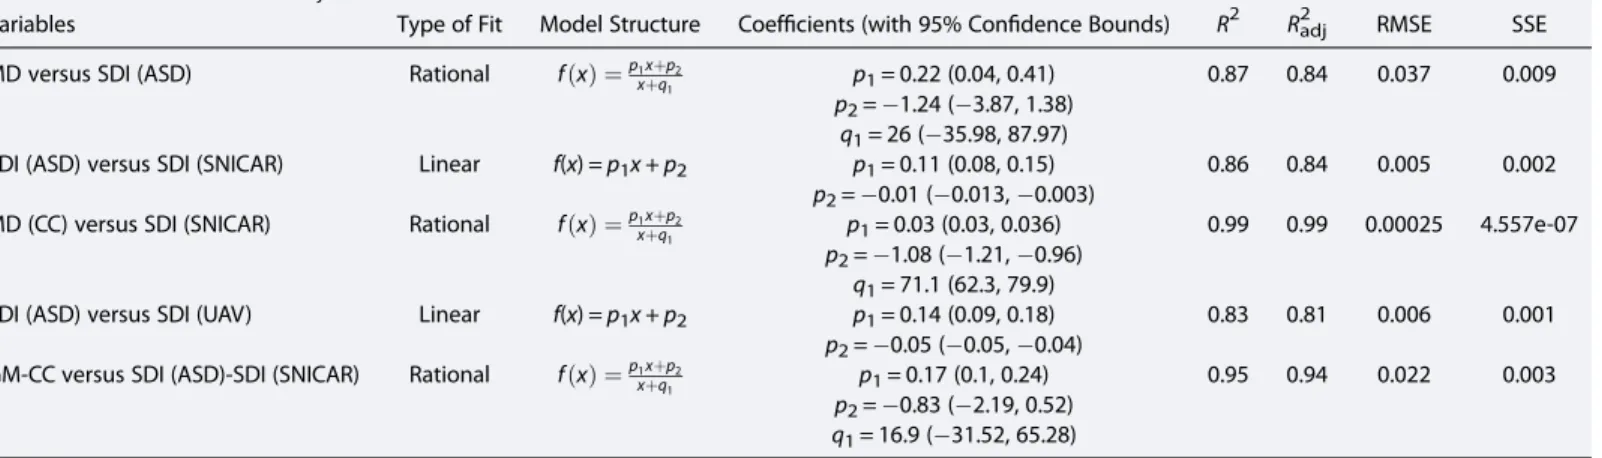 Table 2 shows a review of the model structures, coef ﬁcients (with 95% conﬁdence bounds), and goodness of ﬁt in terms of coefﬁcient of determination (R 2